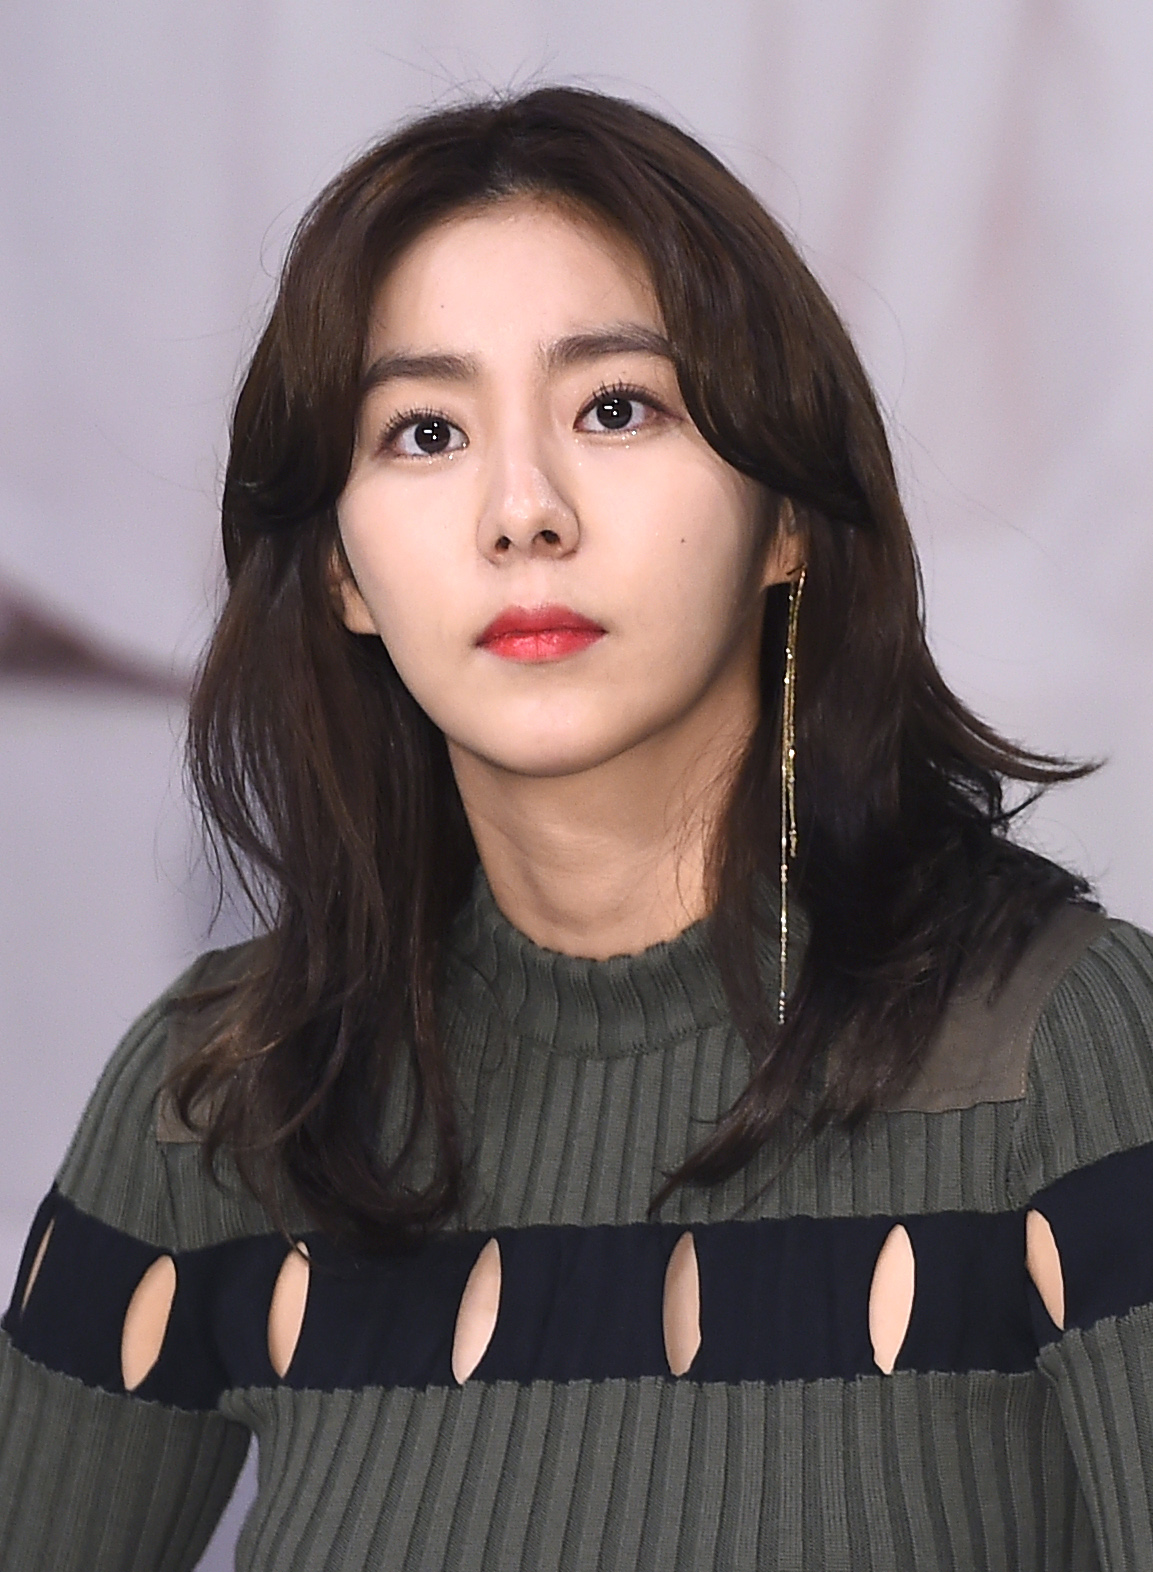 After School S Uee Begins To Win Recognition From The